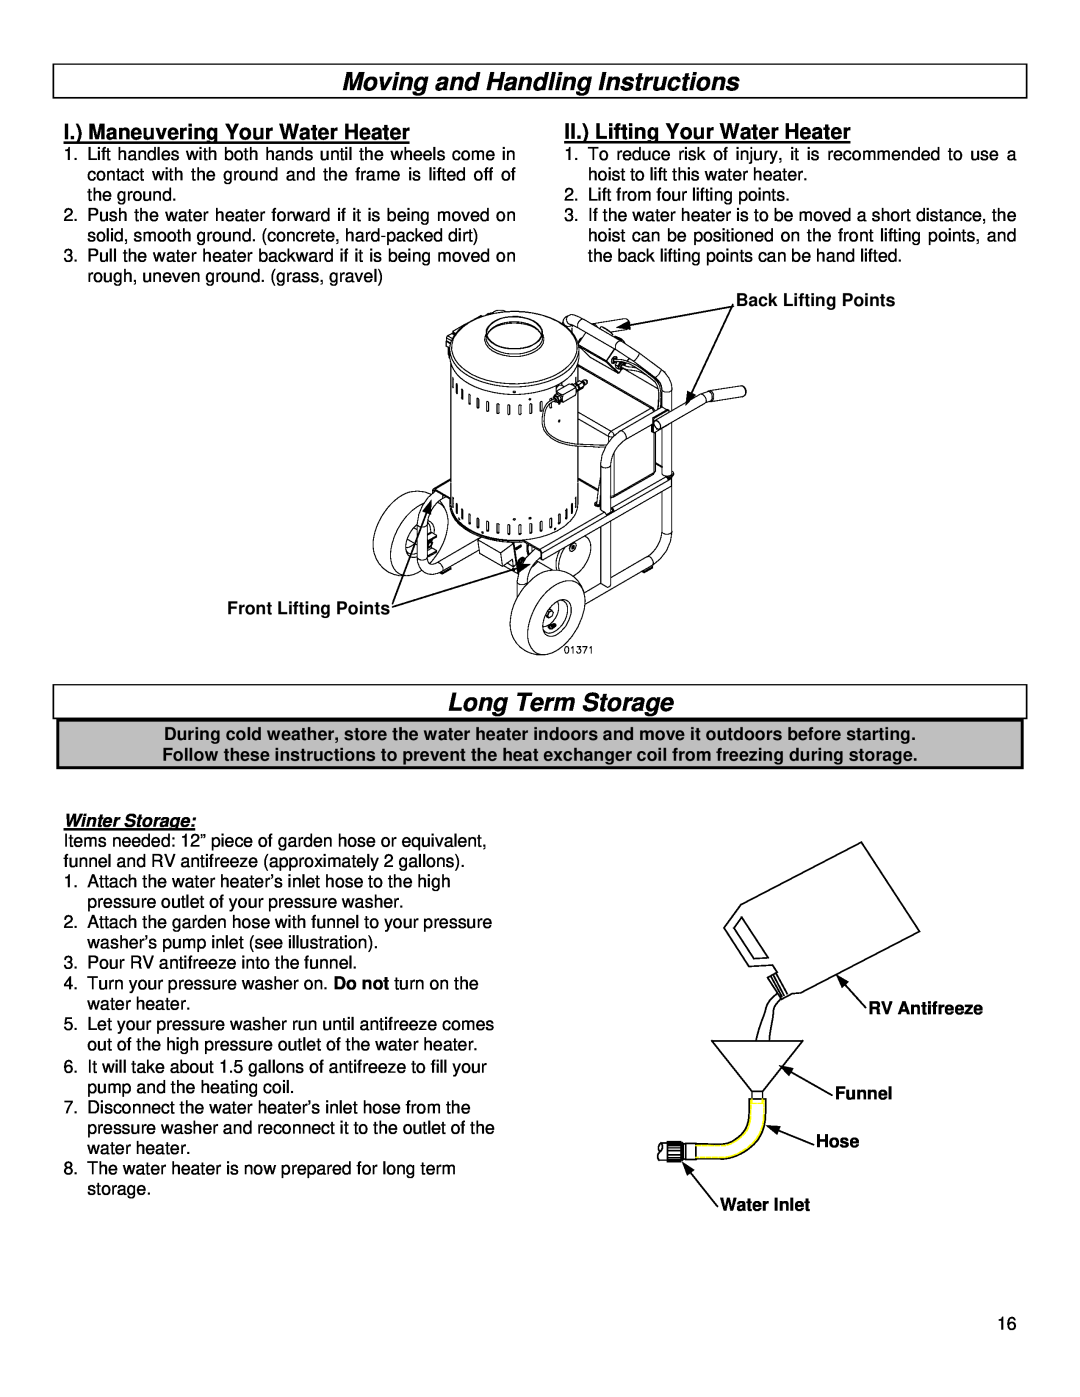 Northern Industrial Tools 157494 Moving and Handling Instructions, Long Term Storage, I. Maneuvering Your Water Heater 